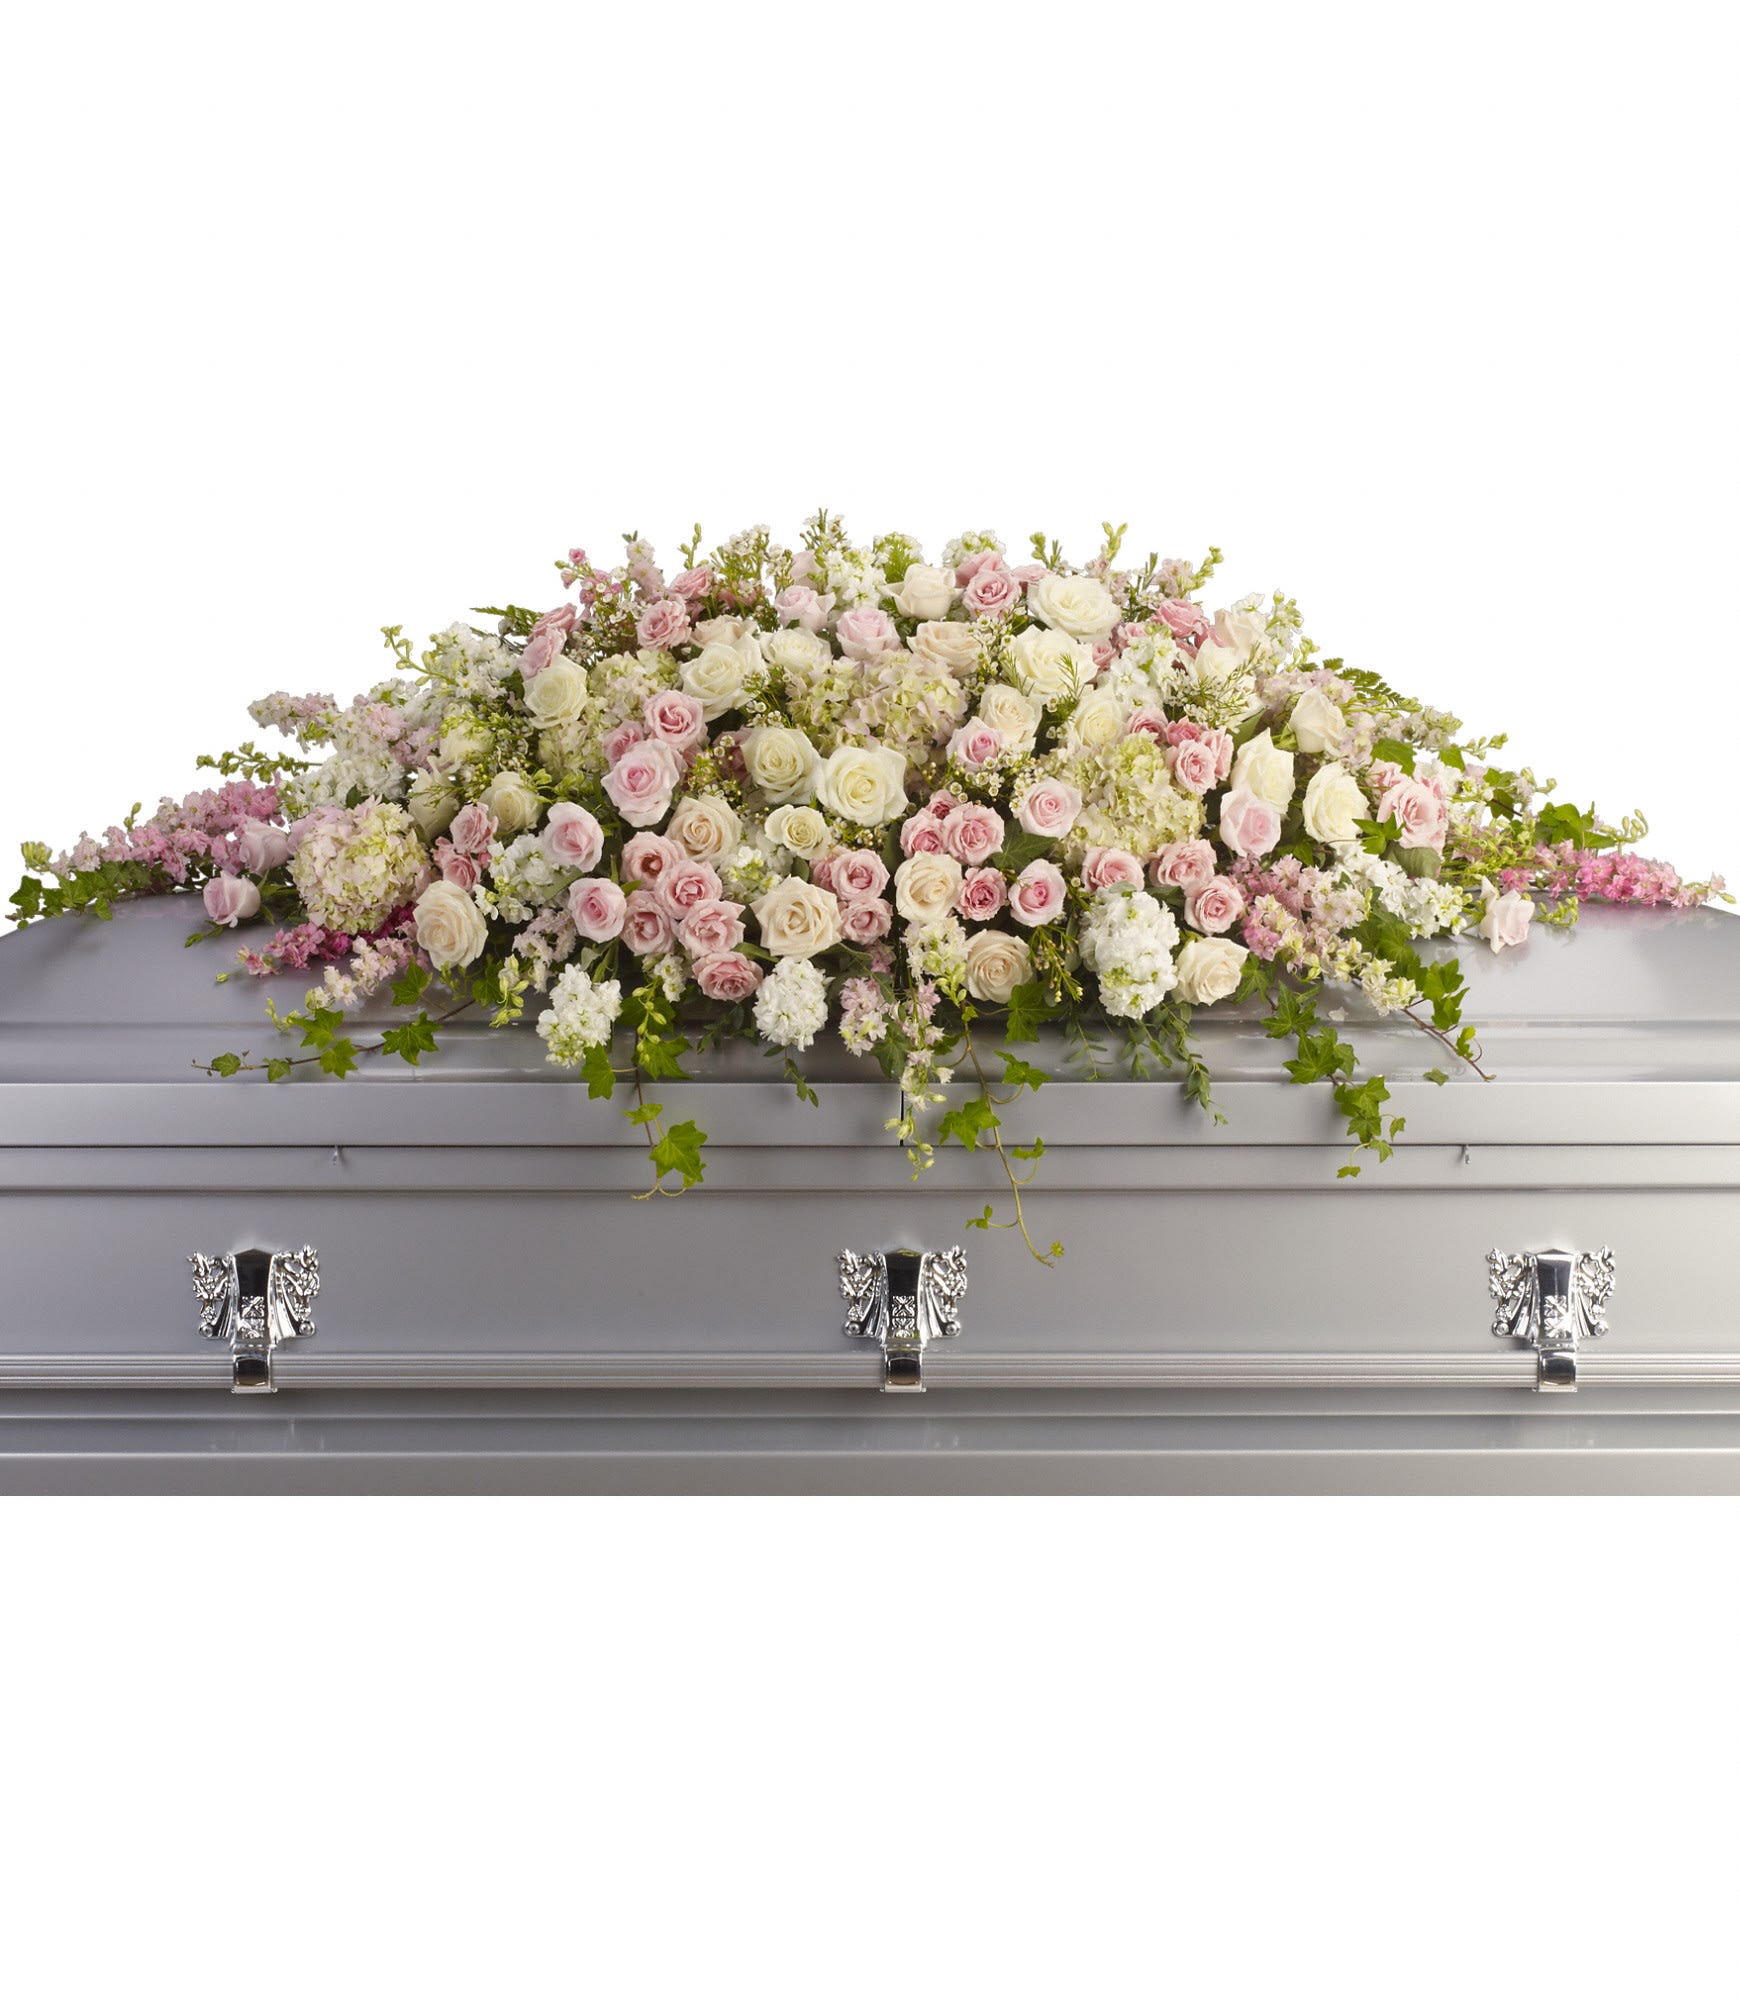 Always Adored Casket Spray by Teleflora - A beautiful spray of soft pink, white and crÃ¨me blooms ease the burden of loss.  